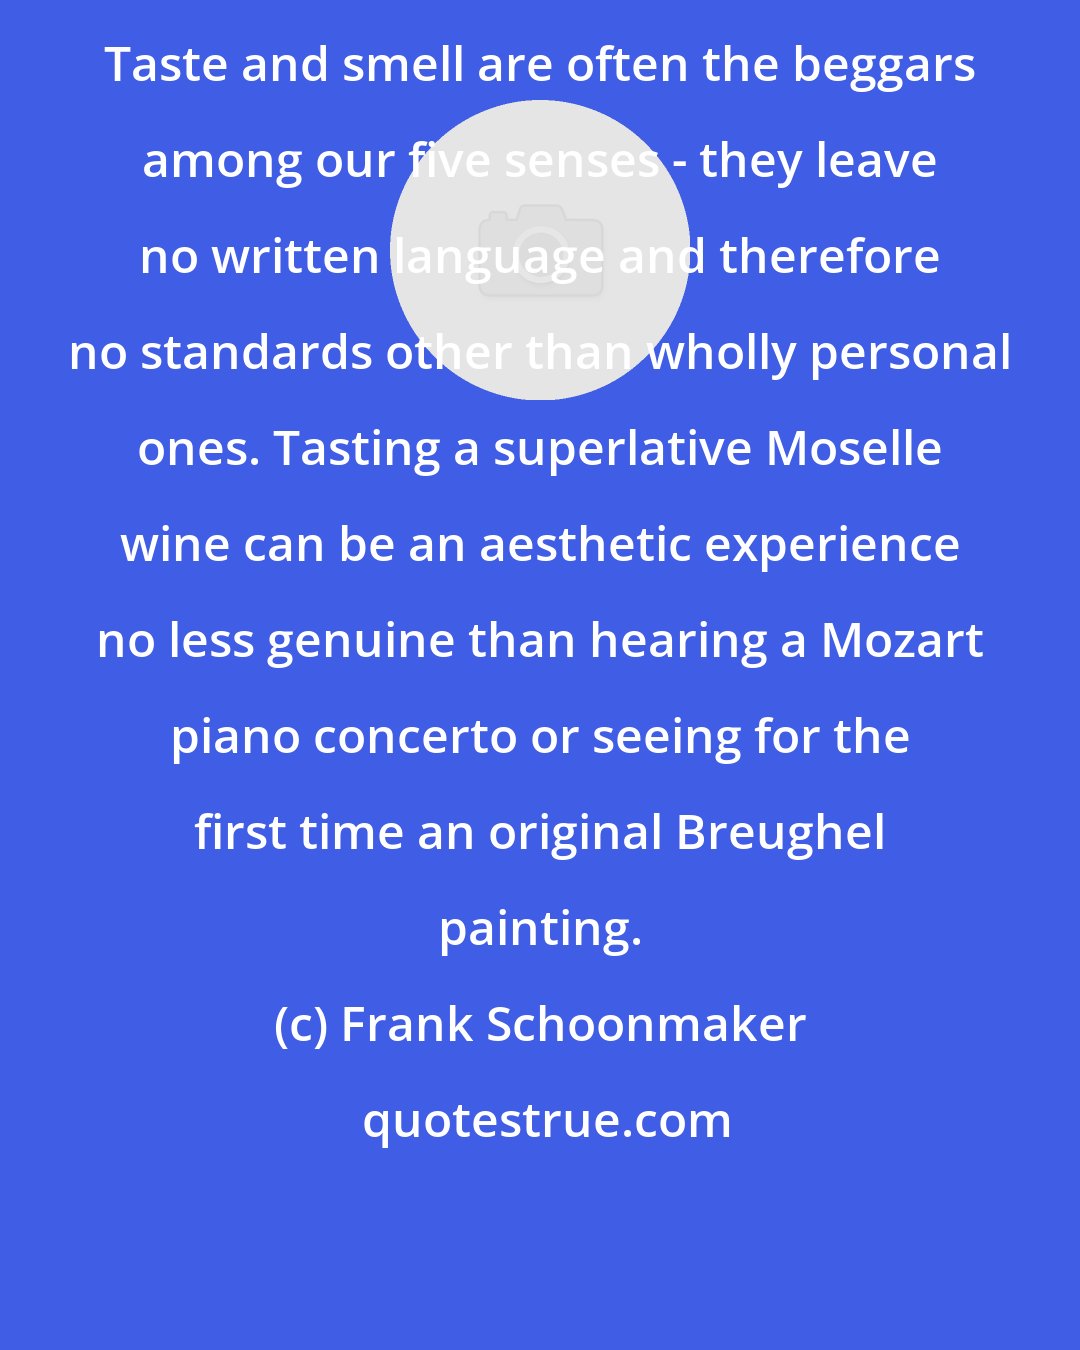 Frank Schoonmaker: Taste and smell are often the beggars among our five senses - they leave no written language and therefore no standards other than wholly personal ones. Tasting a superlative Moselle wine can be an aesthetic experience no less genuine than hearing a Mozart piano concerto or seeing for the first time an original Breughel painting.